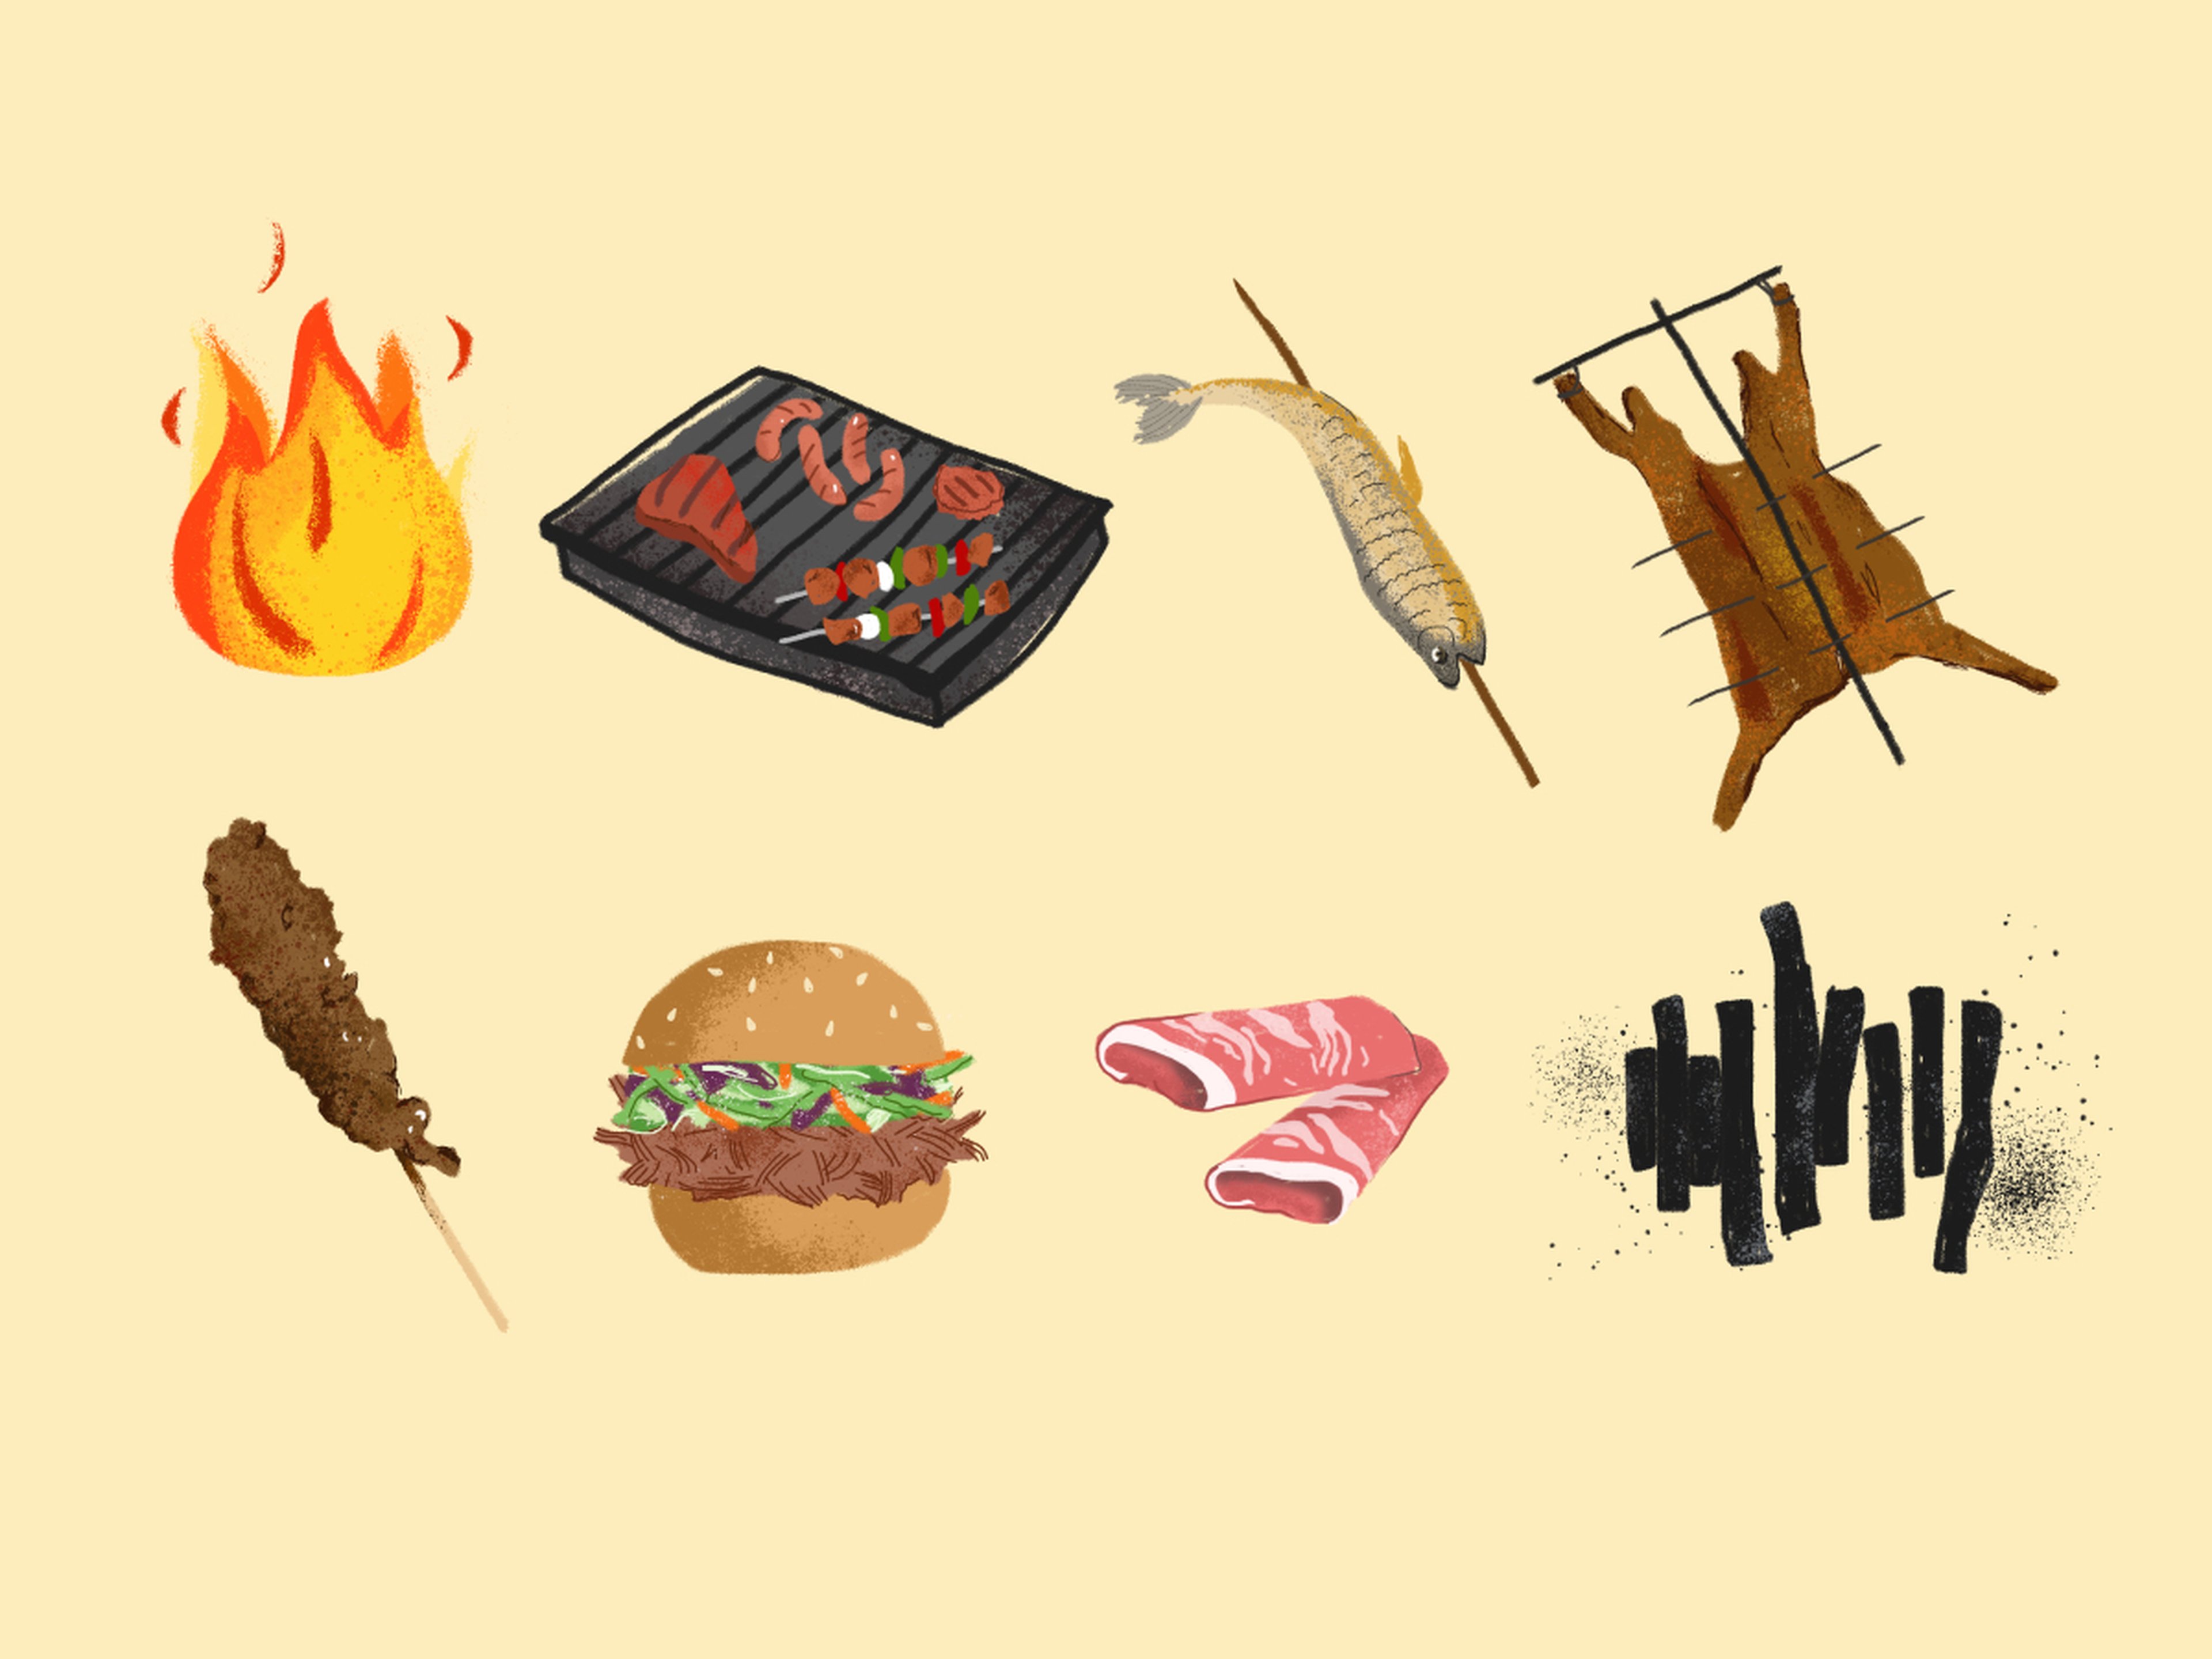 Grilling Traditions Around the World